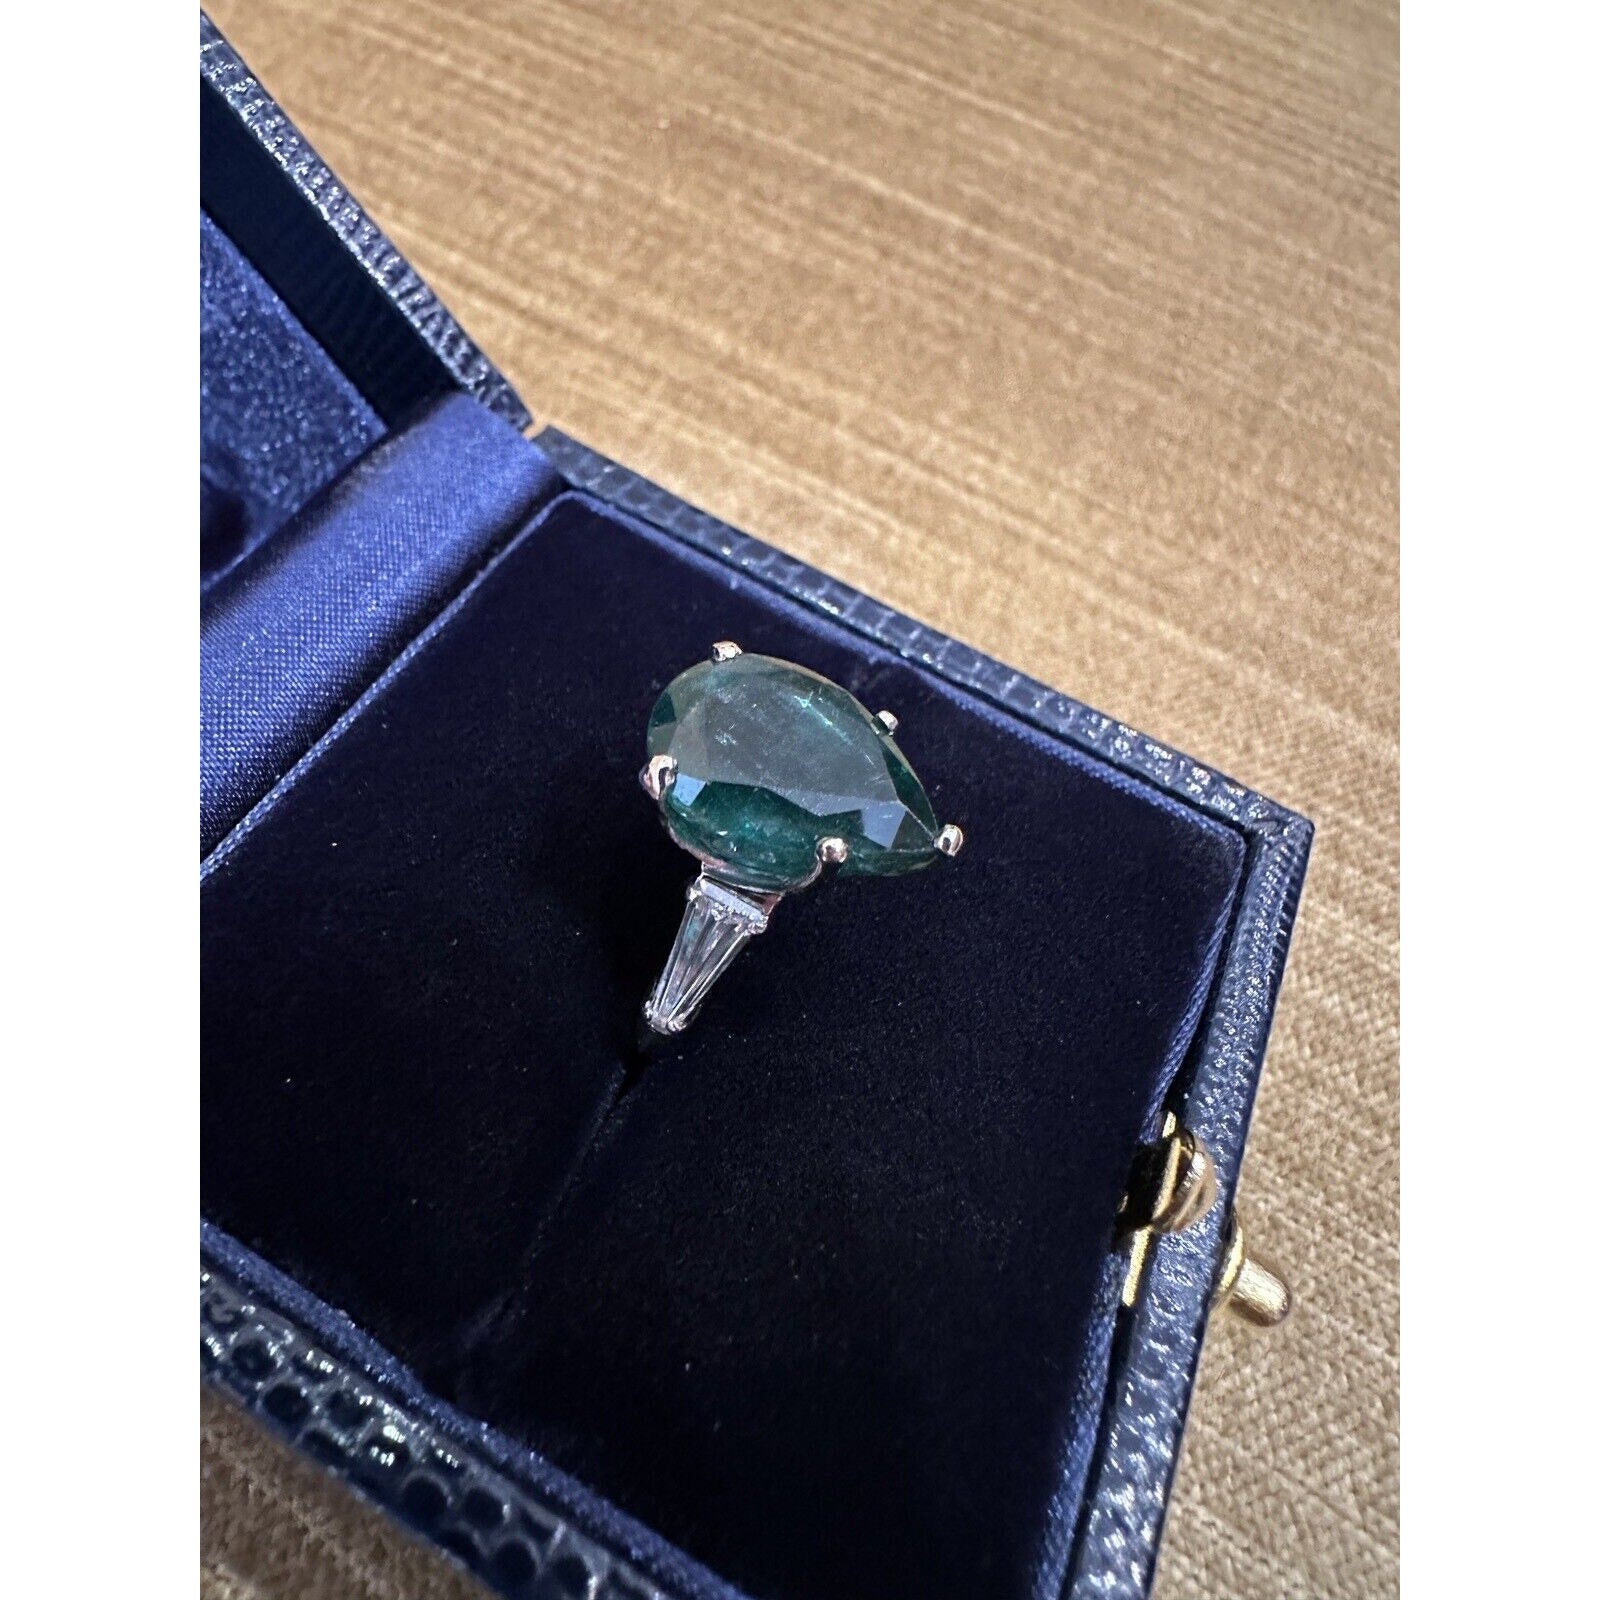 GIA Certified Pear Emerald 5.96 ct and Diamond Ring in Platinum - HM2484SE